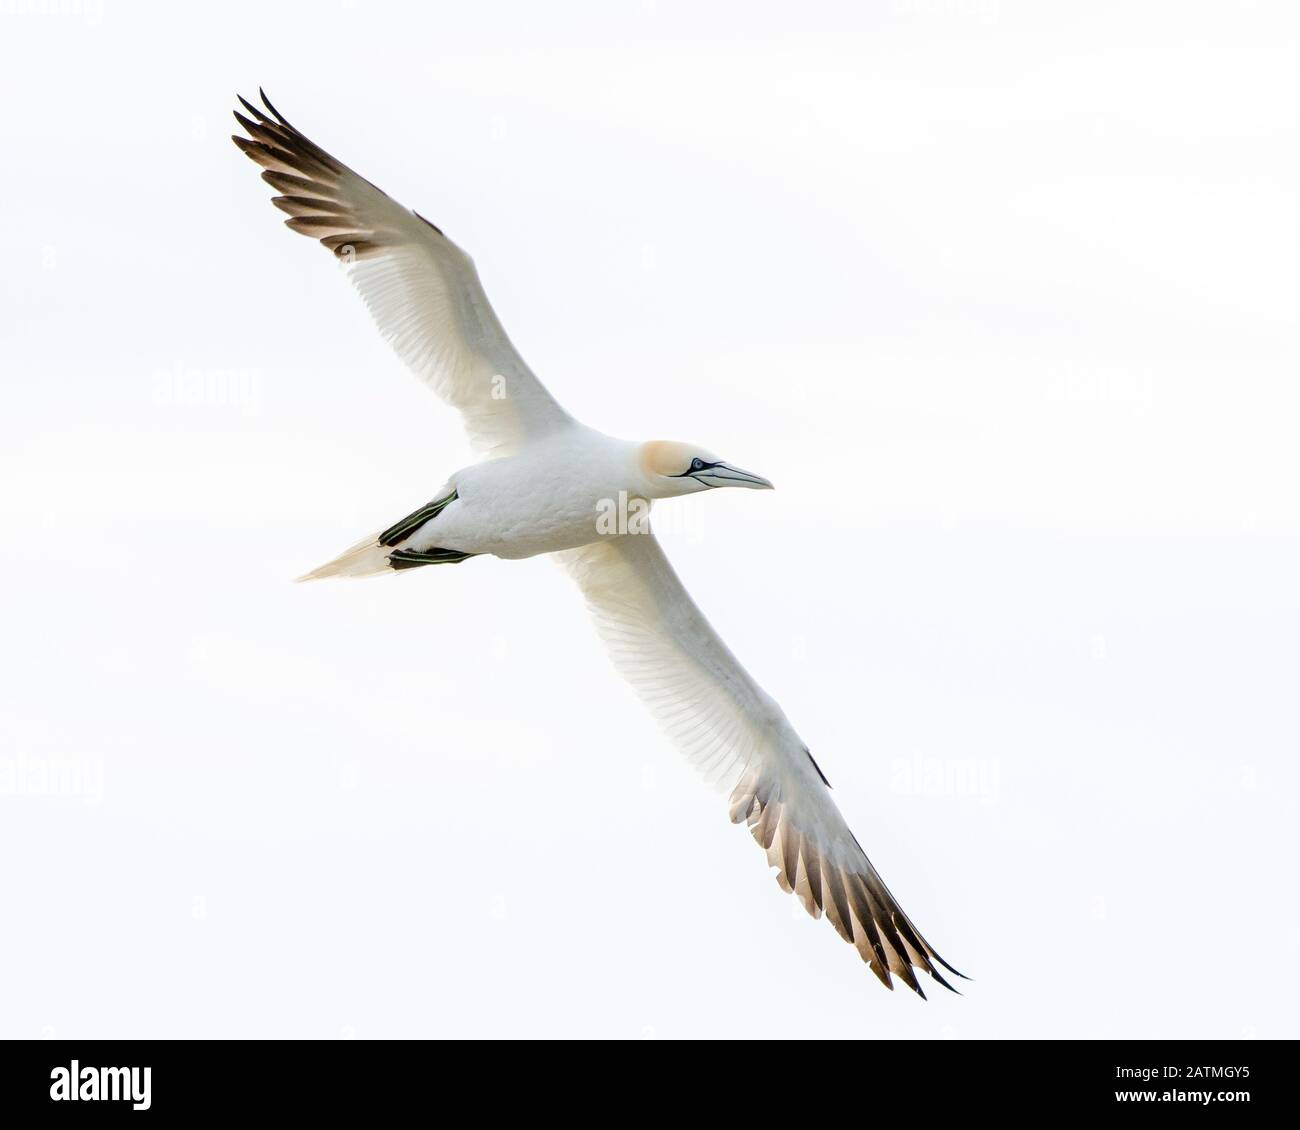 A Northern gannet (Morus bassanus) in flight isolated against a white sky Stock Photo